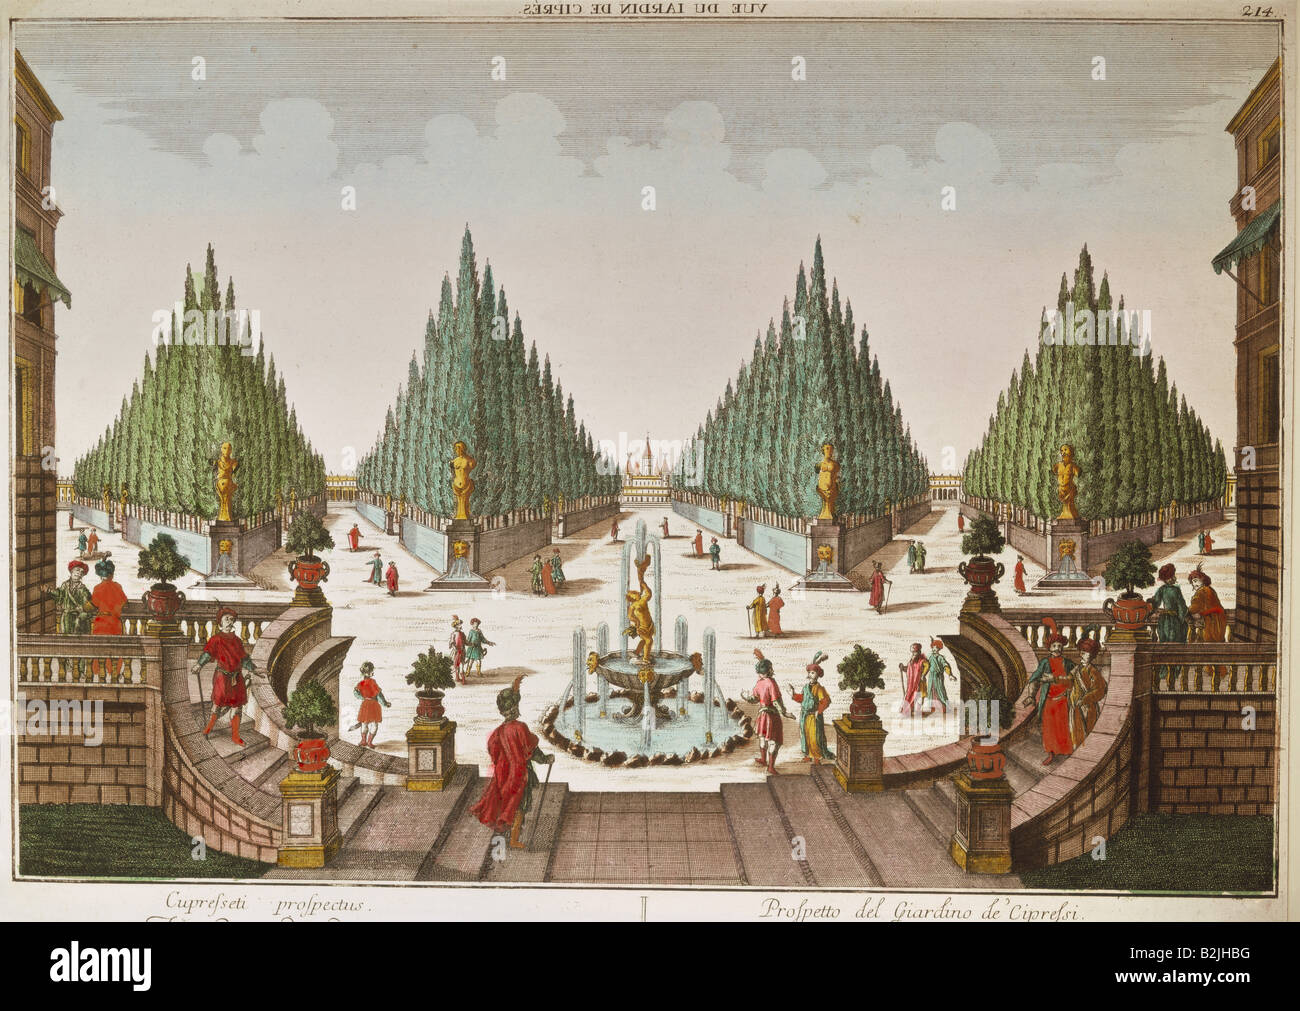 architecture, gardens and parks, cypress garden, raree show picture, copper engraving, coloured, Augsburg, Germany, mid 18th century, Munich puppet theatre collection, garden, park, cypresses, fine arts, graphic, graphics, print, prints, fountain, fountains, promenader, promenaders, people, historic, historical, pictures, prospect, Artist's Copyright has not to be cleared Stock Photo